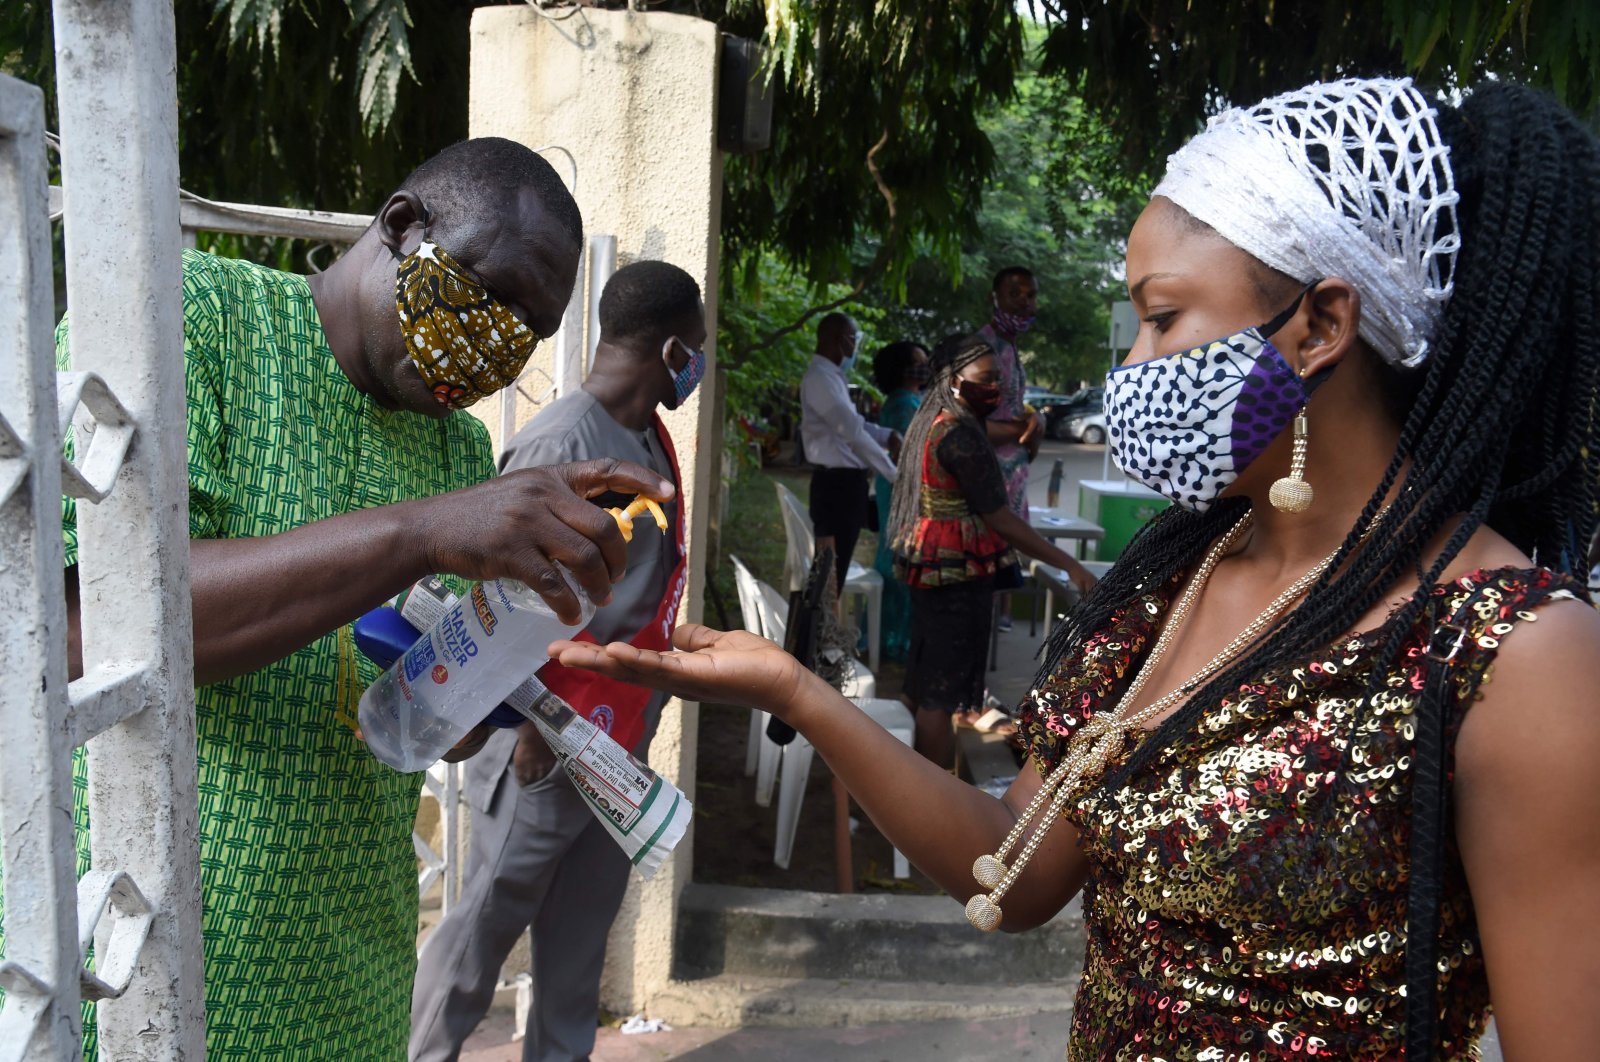 A woman wearing a face mask sanitizes her hands outside the Holy Cross Cathedral following the reopening of churches and lifting of restrictions on religious gatherings as a precaution to check the spread of COVID-19, in Lagos, Nigeria, Aug. 9, 2020. (AFP Photo)